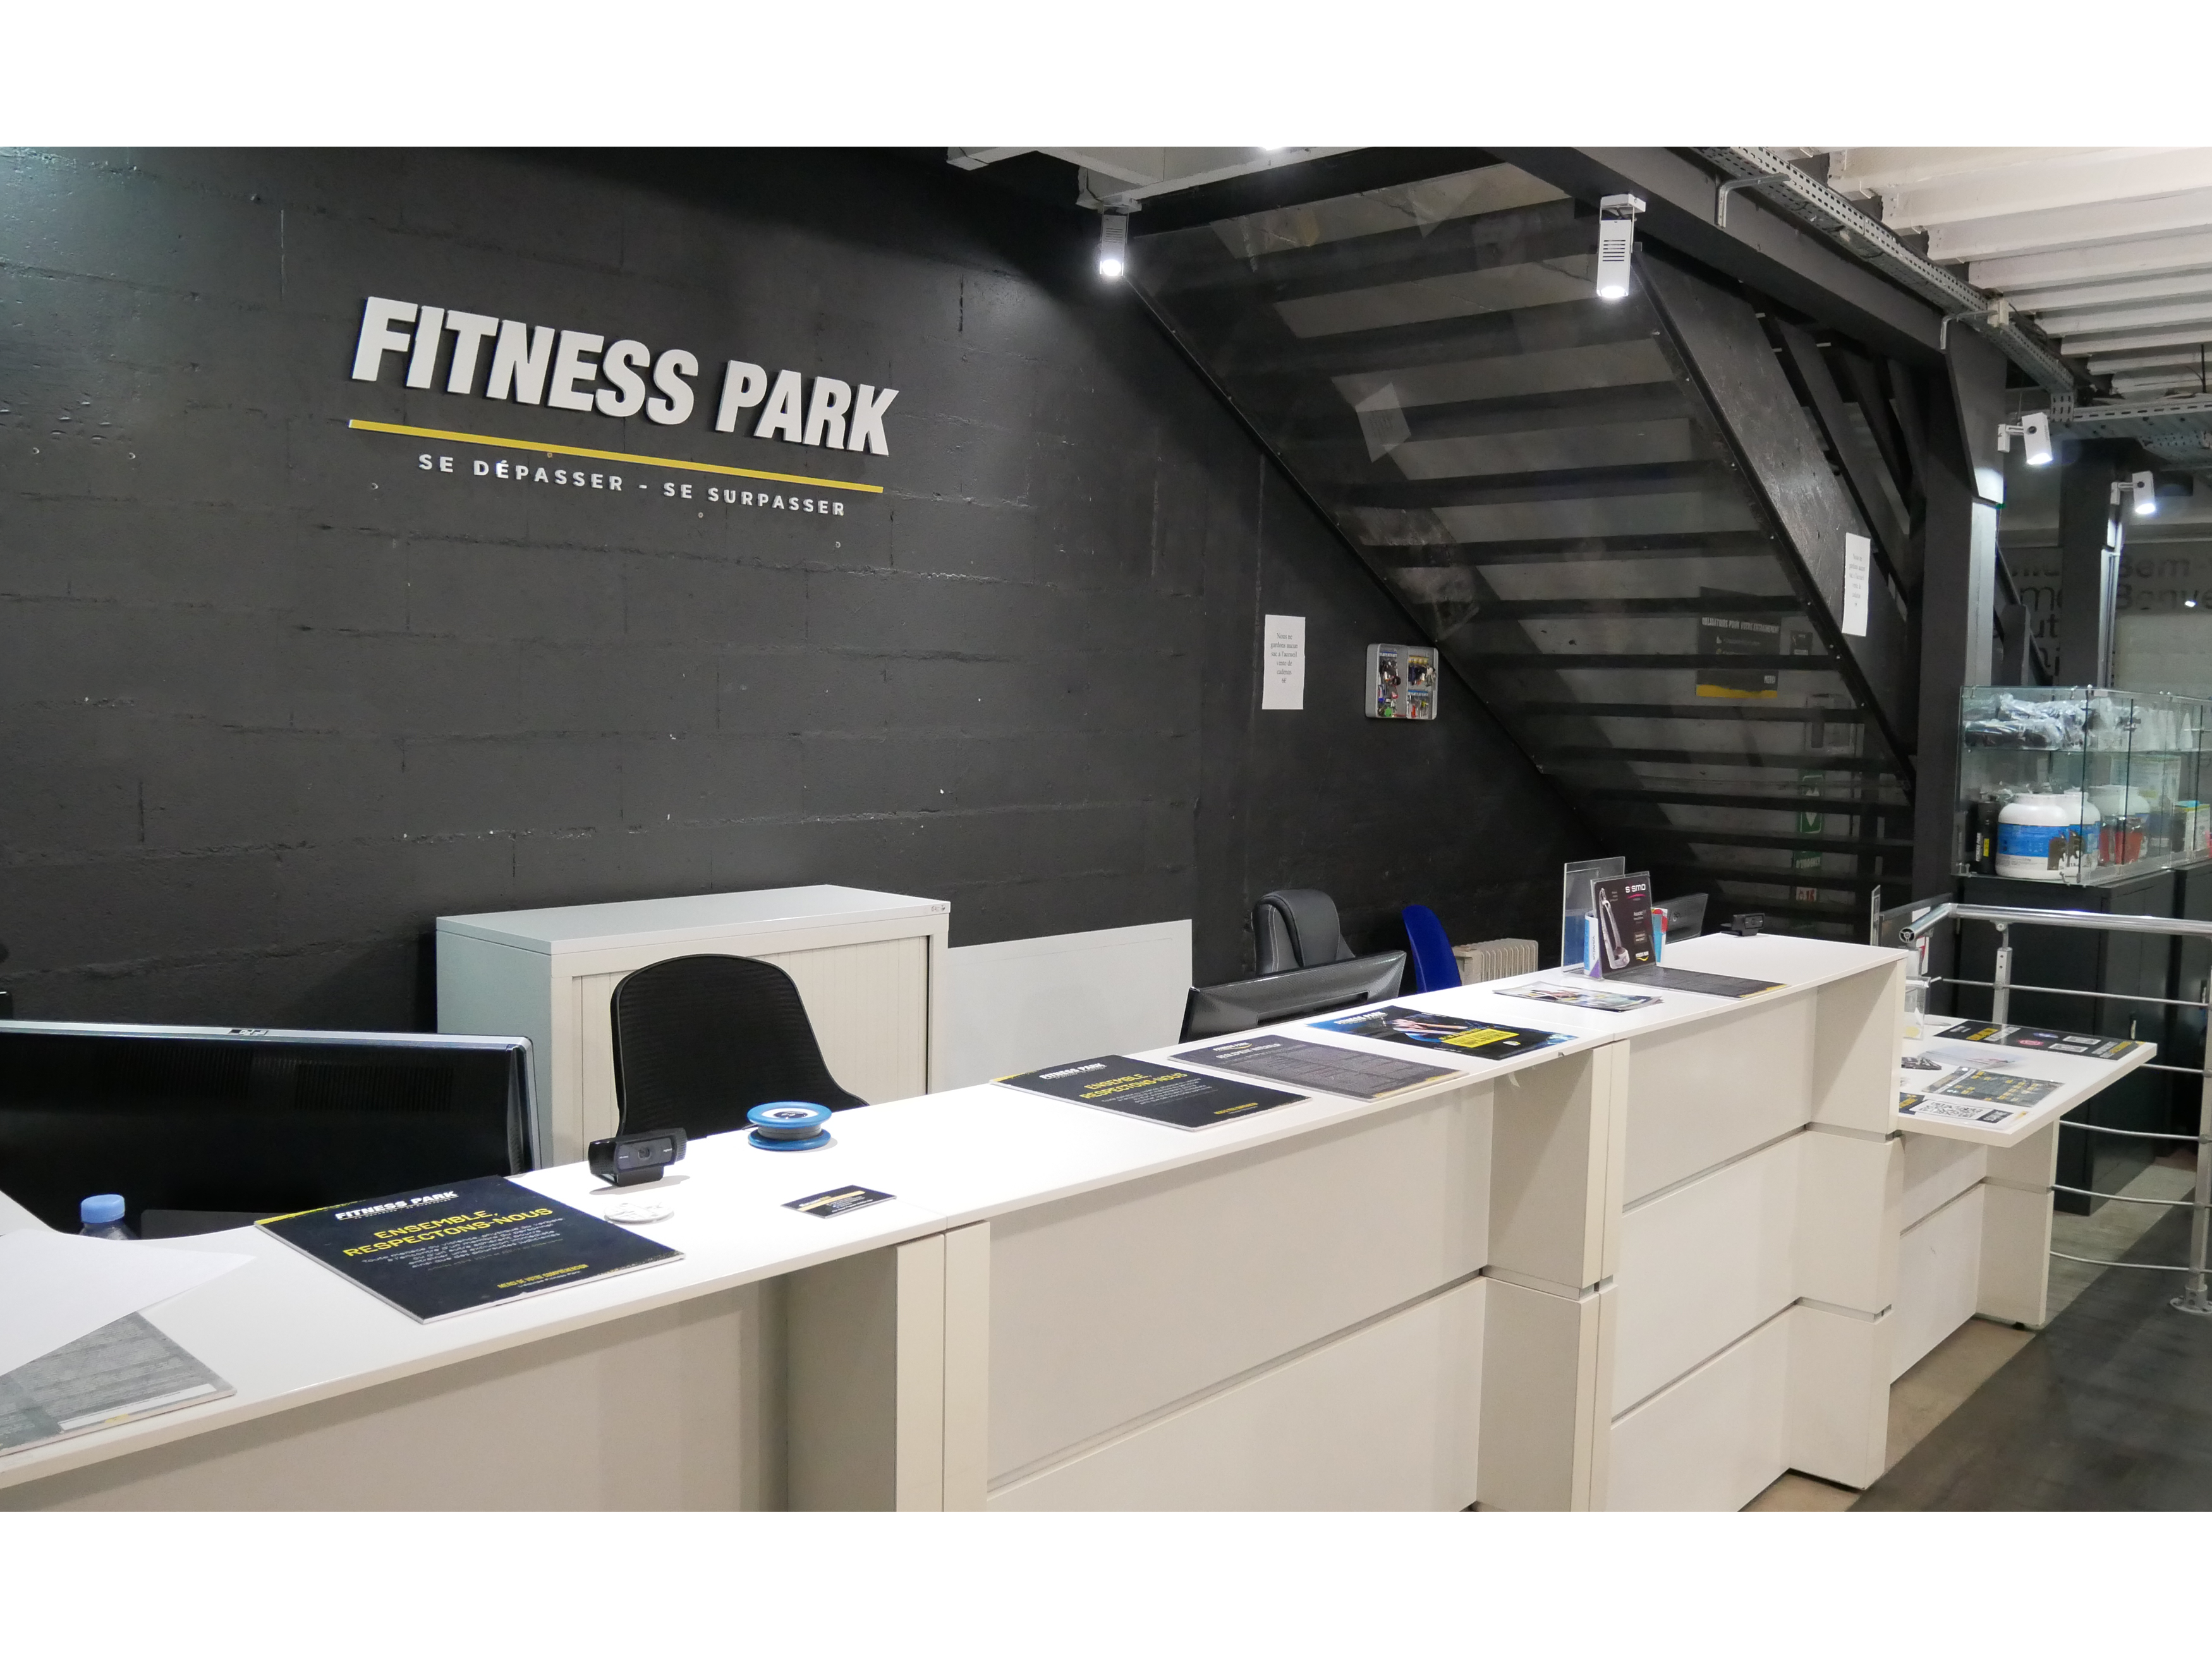 Fitness Park Montreuil